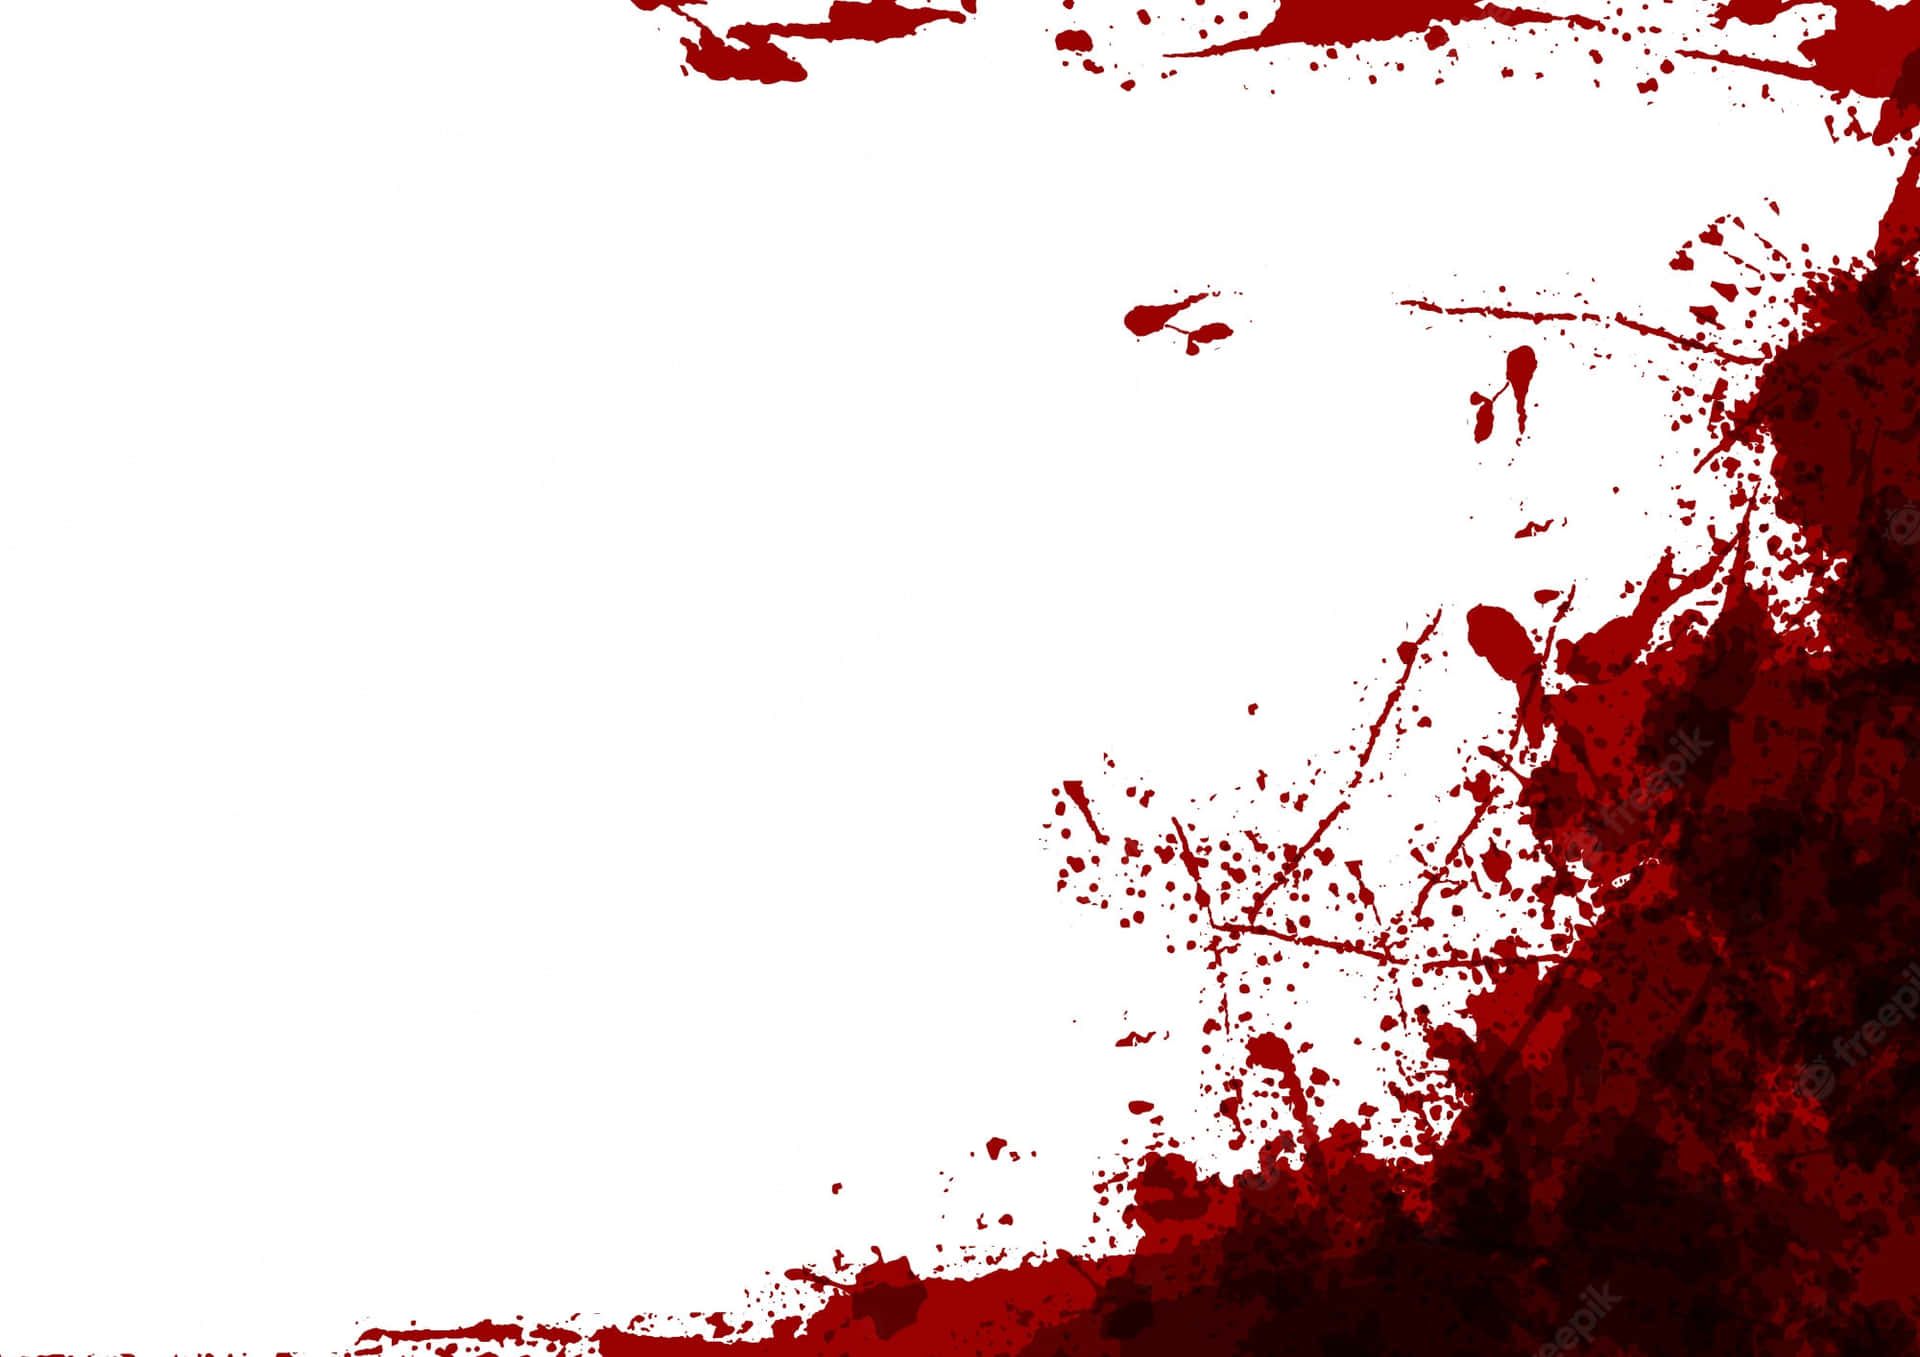 Red splatter stains on a white background - Blood